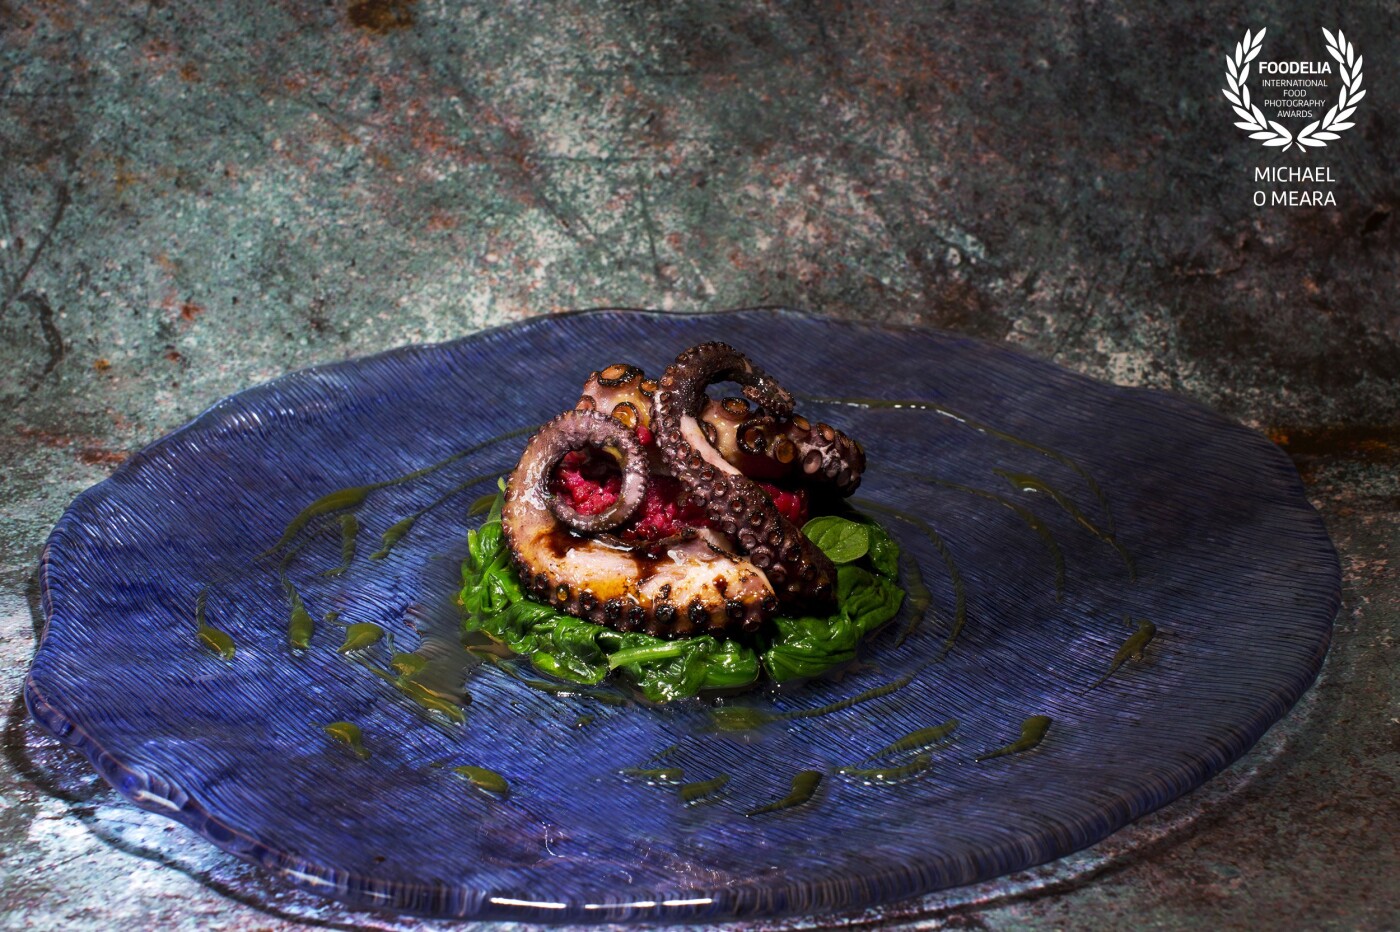 Octopus grilled over a charcoal fire on a little wilted spinach and bulgur wheat made with grated beetroot. The sauce is an orange and white balsamic reduction. 